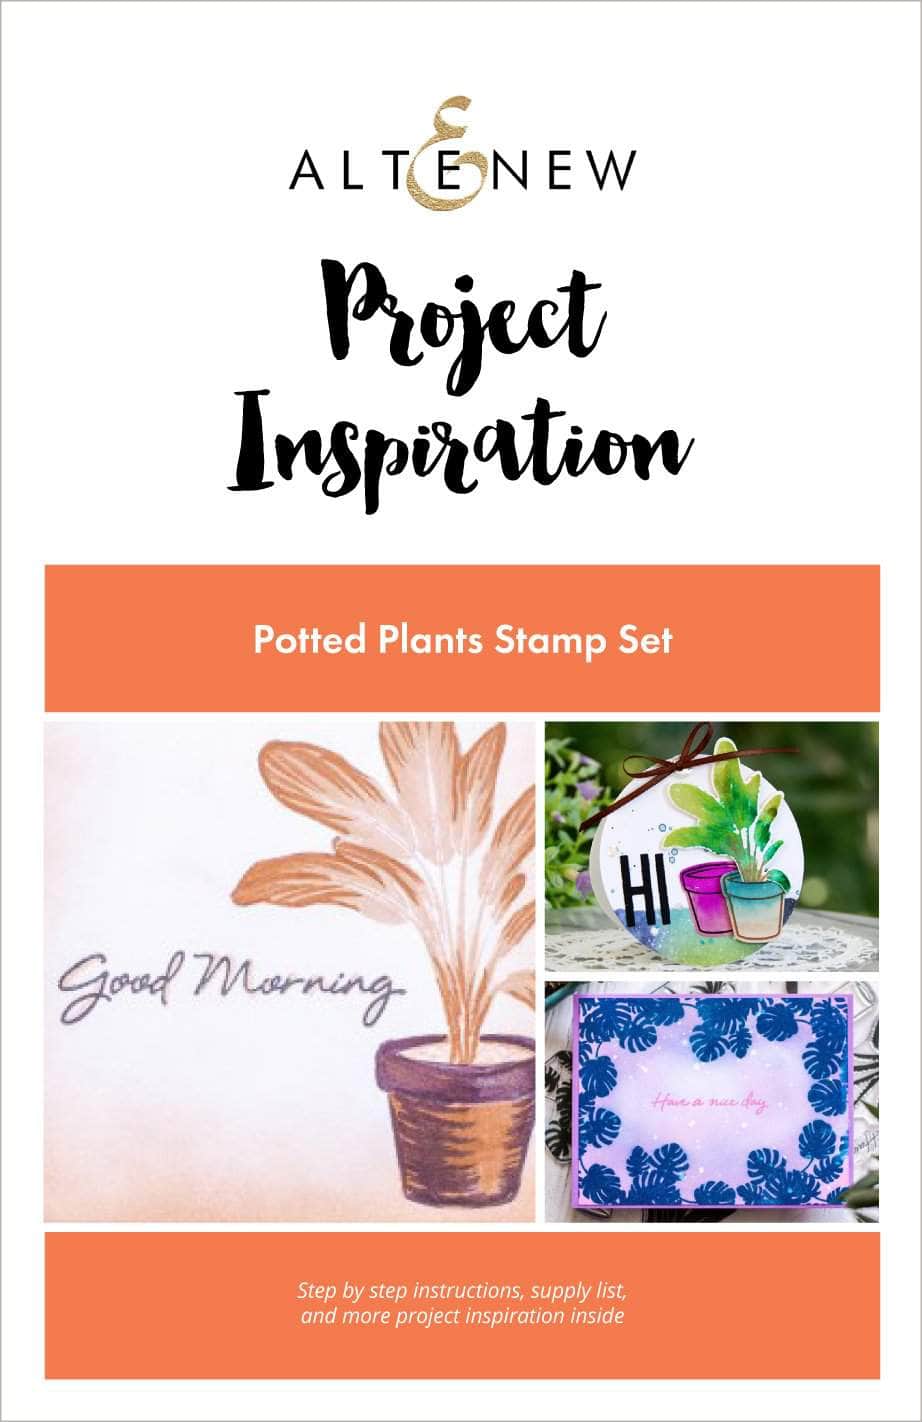 55Printing.com Printed Media Potted Plants Project Inspiration Guide